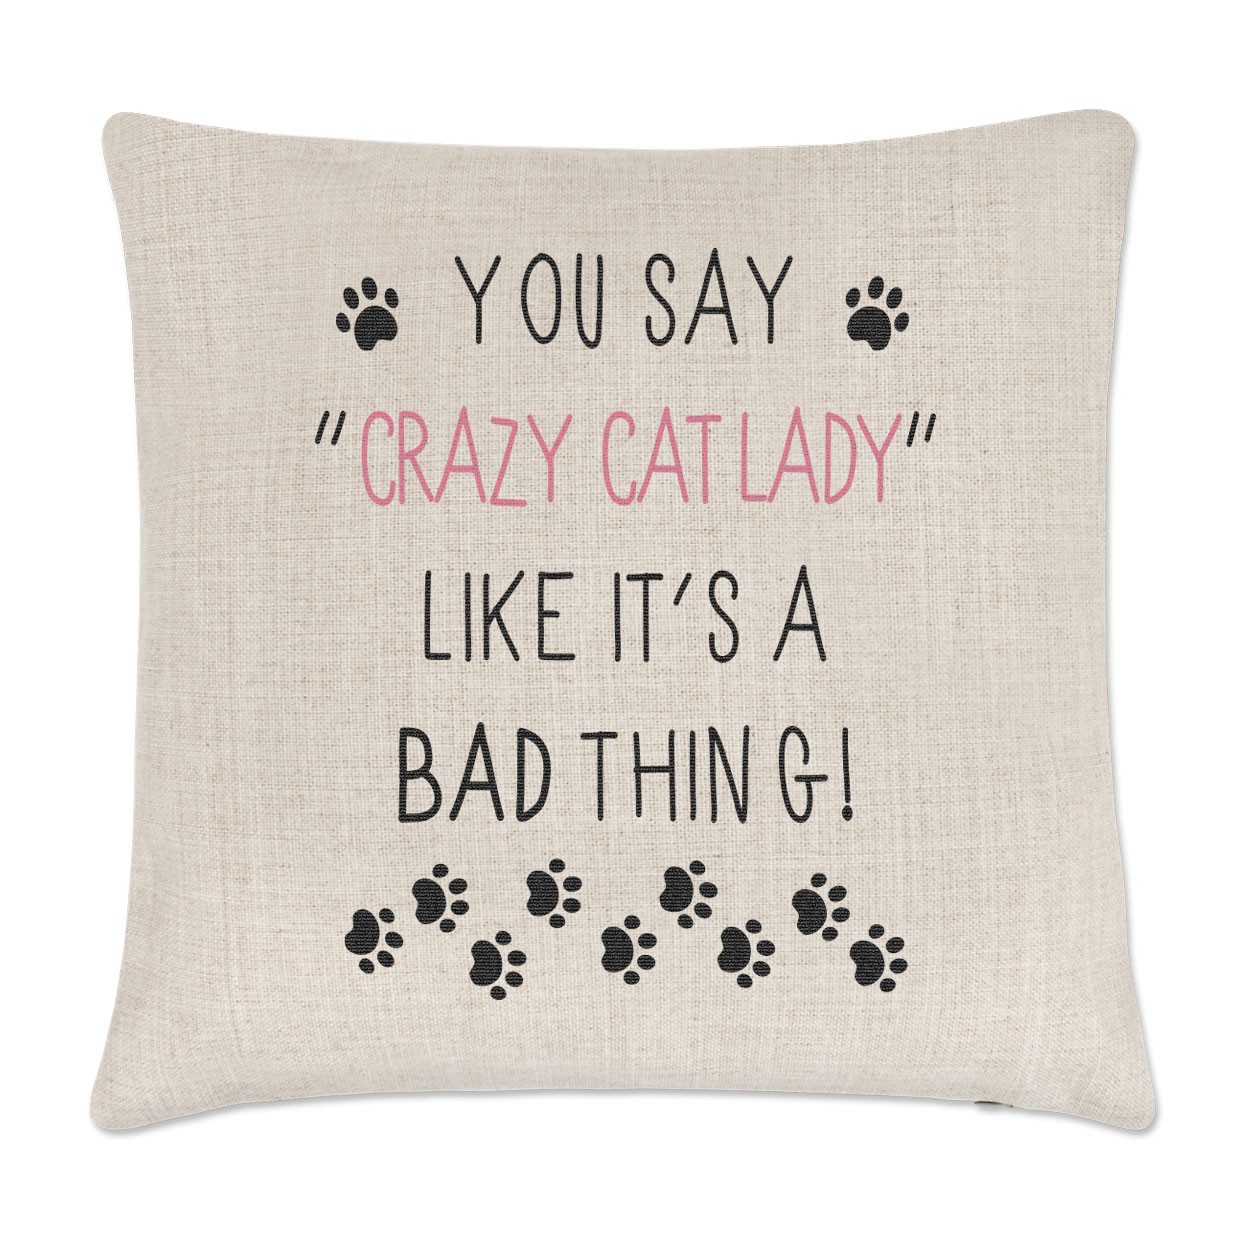 You Say Crazy Cat Lady Like It's A Bad Thing Linen Cushion Cover